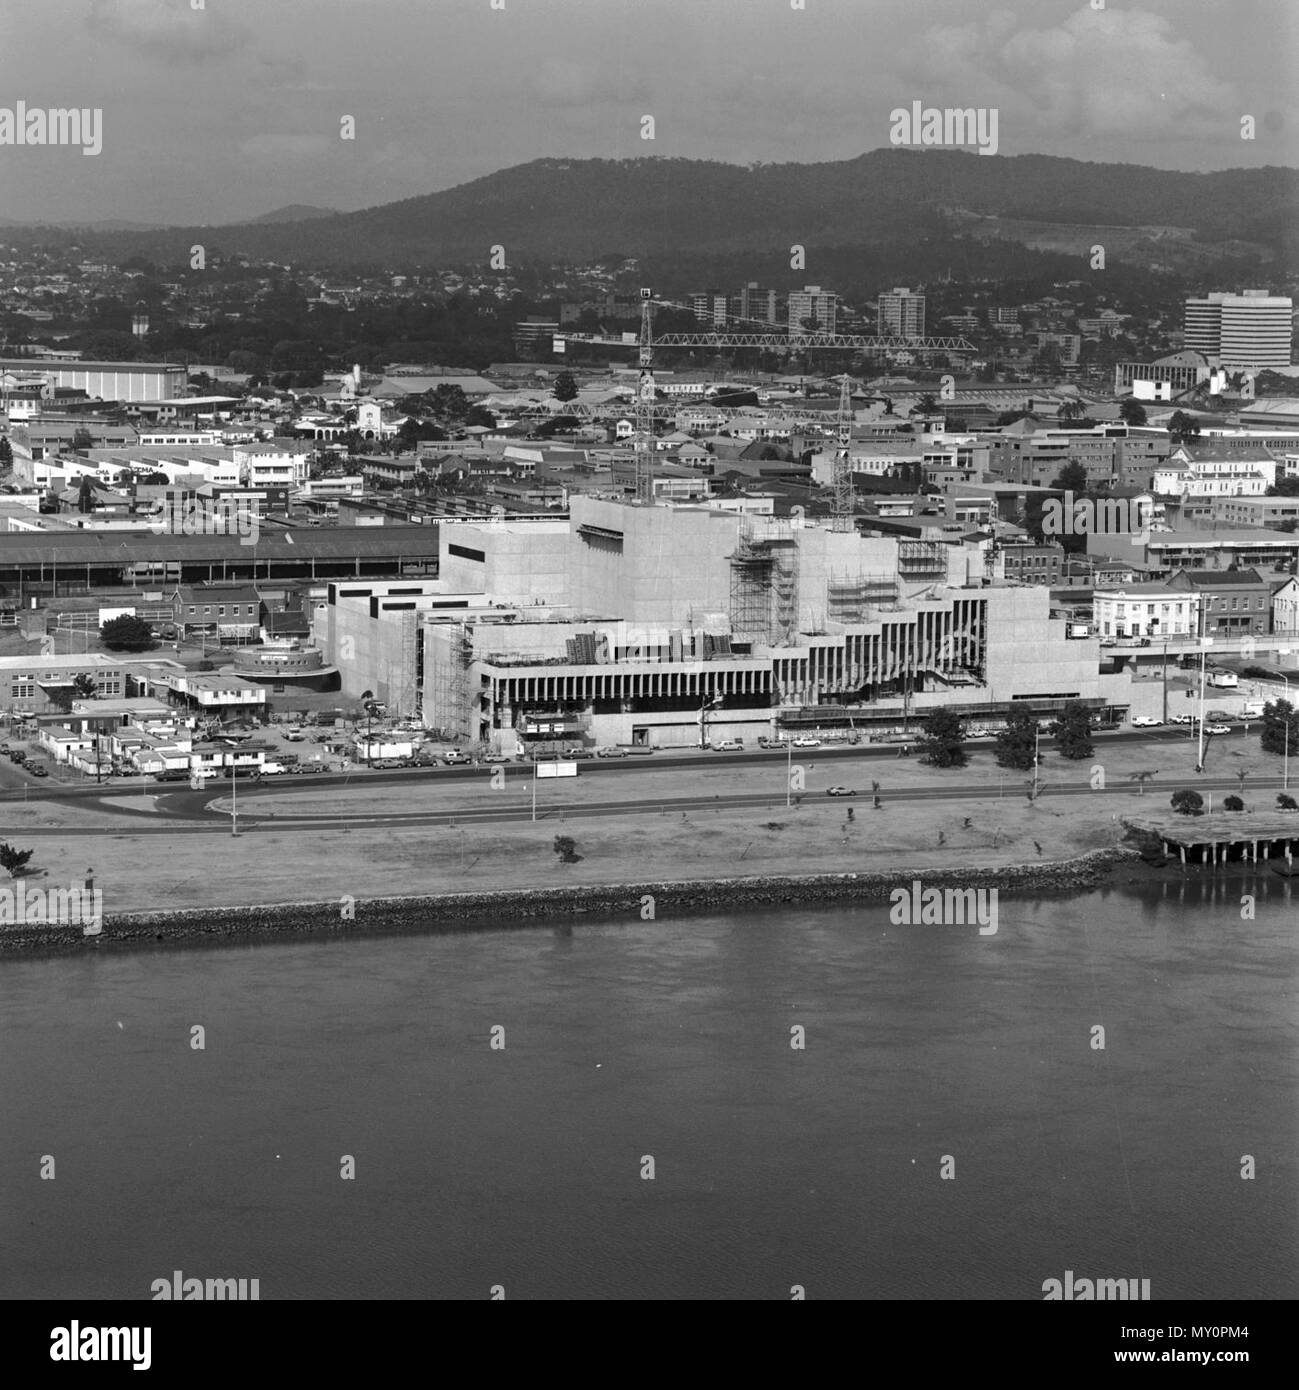 Queensland Performing Arts Centre under construction, South Brisbane, 1983. Preliminary work for the Queensland Performing Arts Centre commenced in 1976 and it was opened in April 1985. Stock Photo